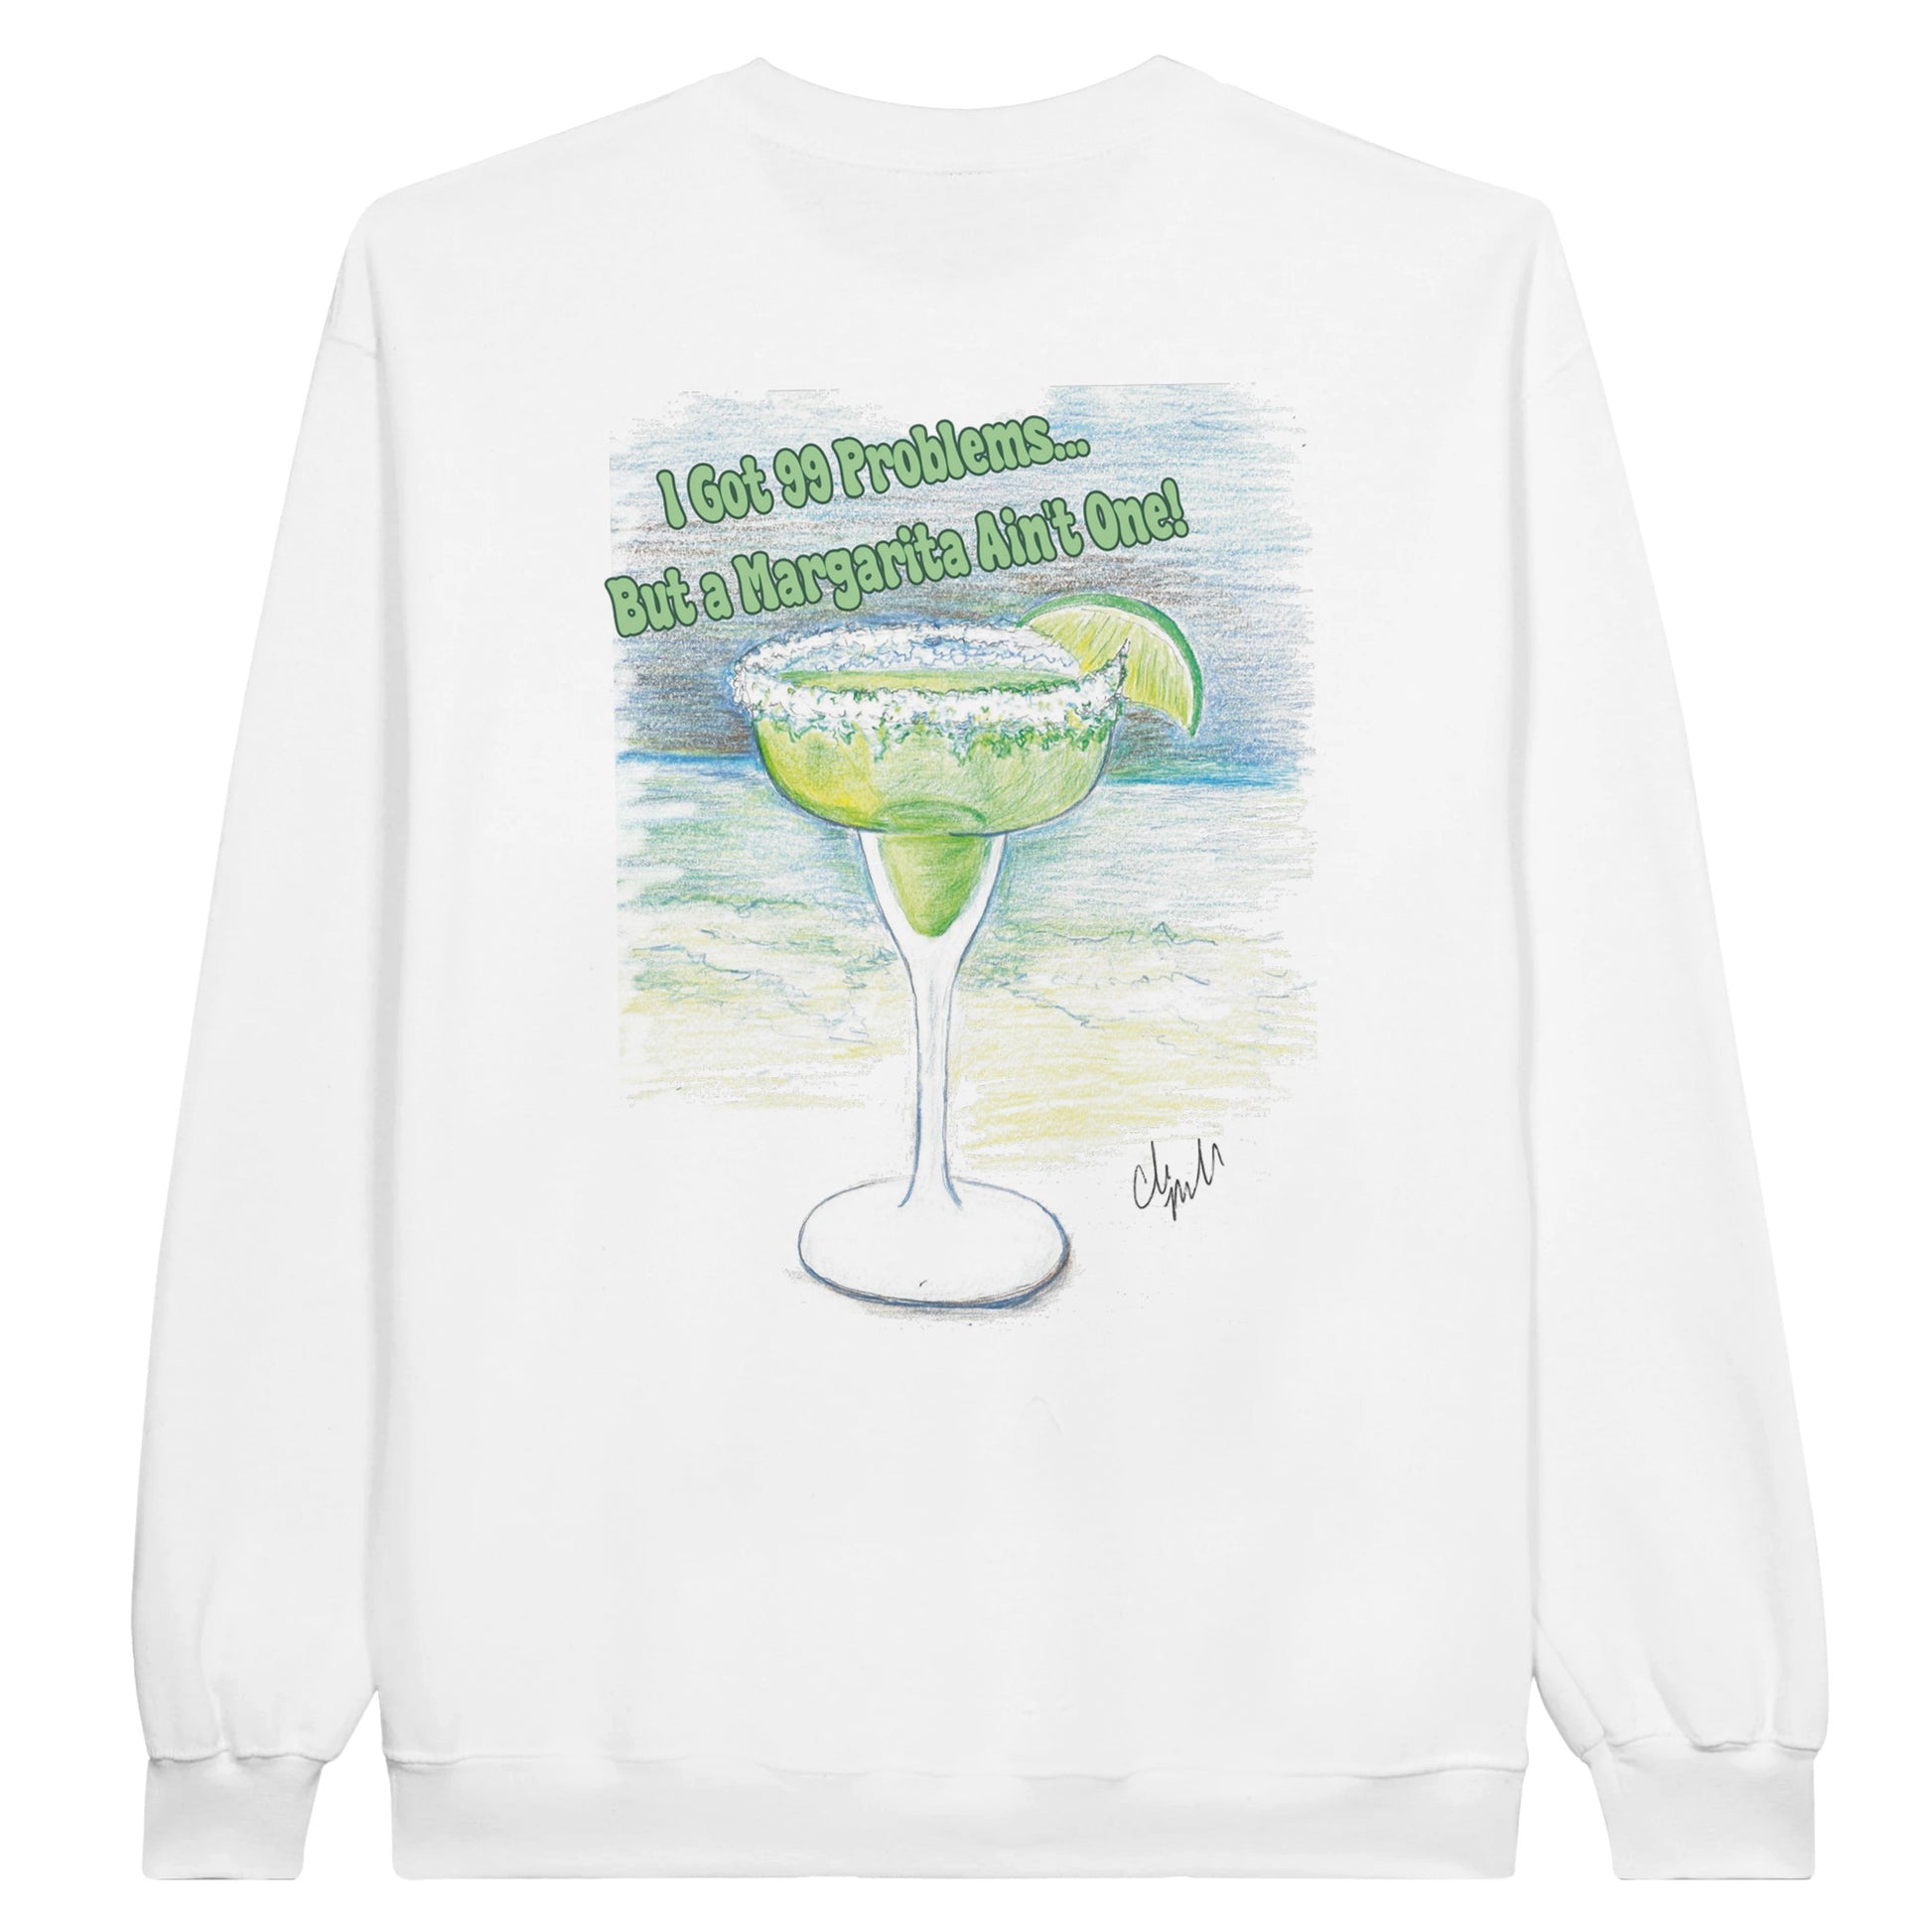 A white Classic Unisex Crewneck sweatshirt with original artwork and motto I Got 99 Problems But a Margarita Ain’t One on back and Whatya Say logo on front from WhatYa Say Apparel a rear view lying down.